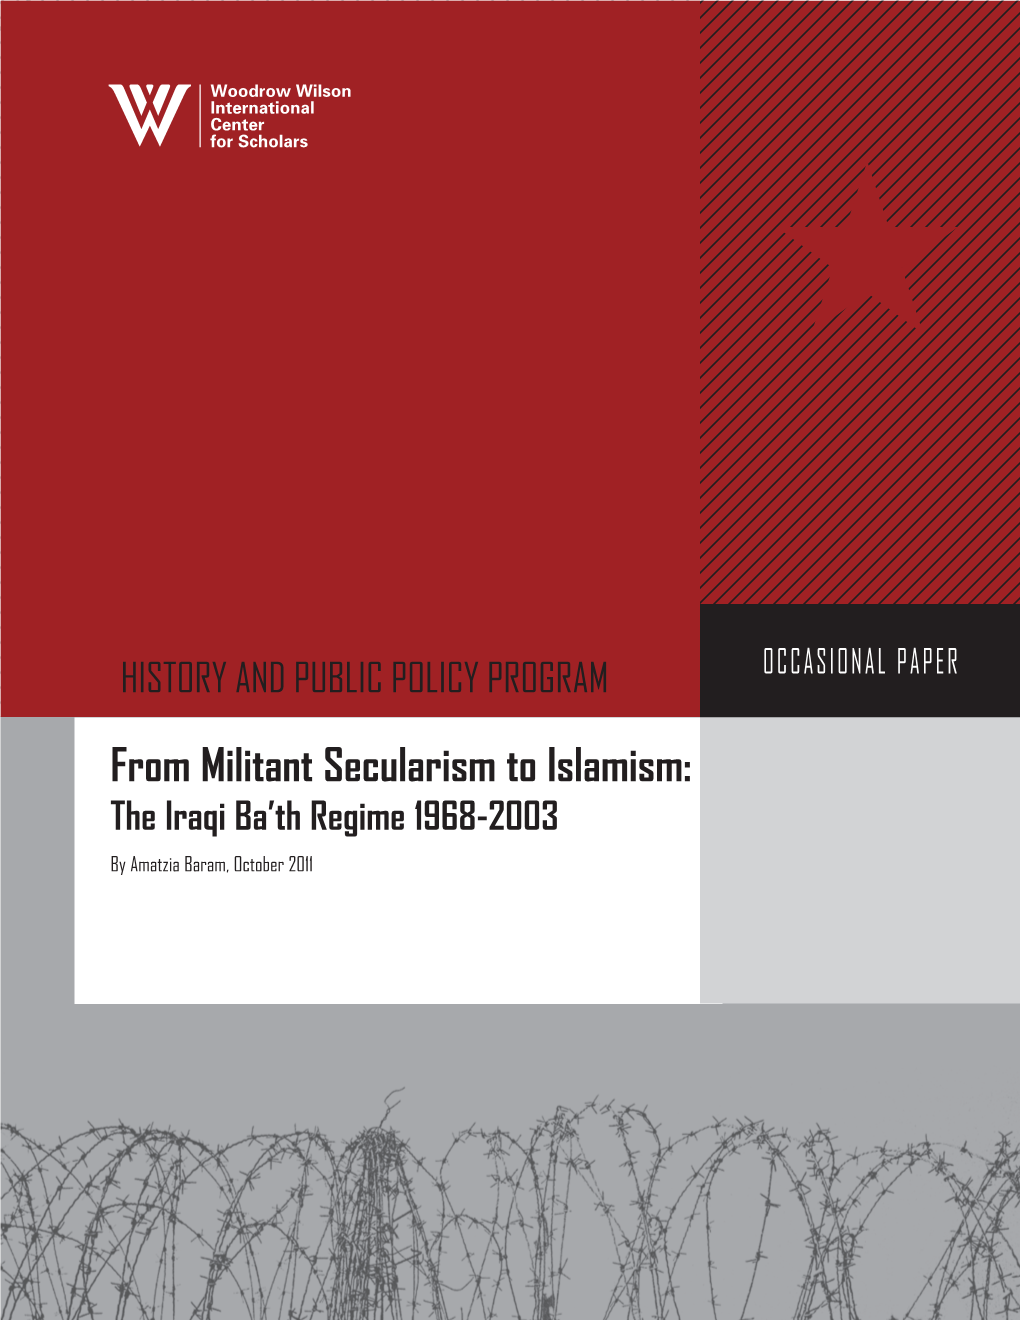 From Militant Secularism to Islamism: the Iraqi Ba’Th Regime 1968-2003 by Amatzia Baram, October 2011